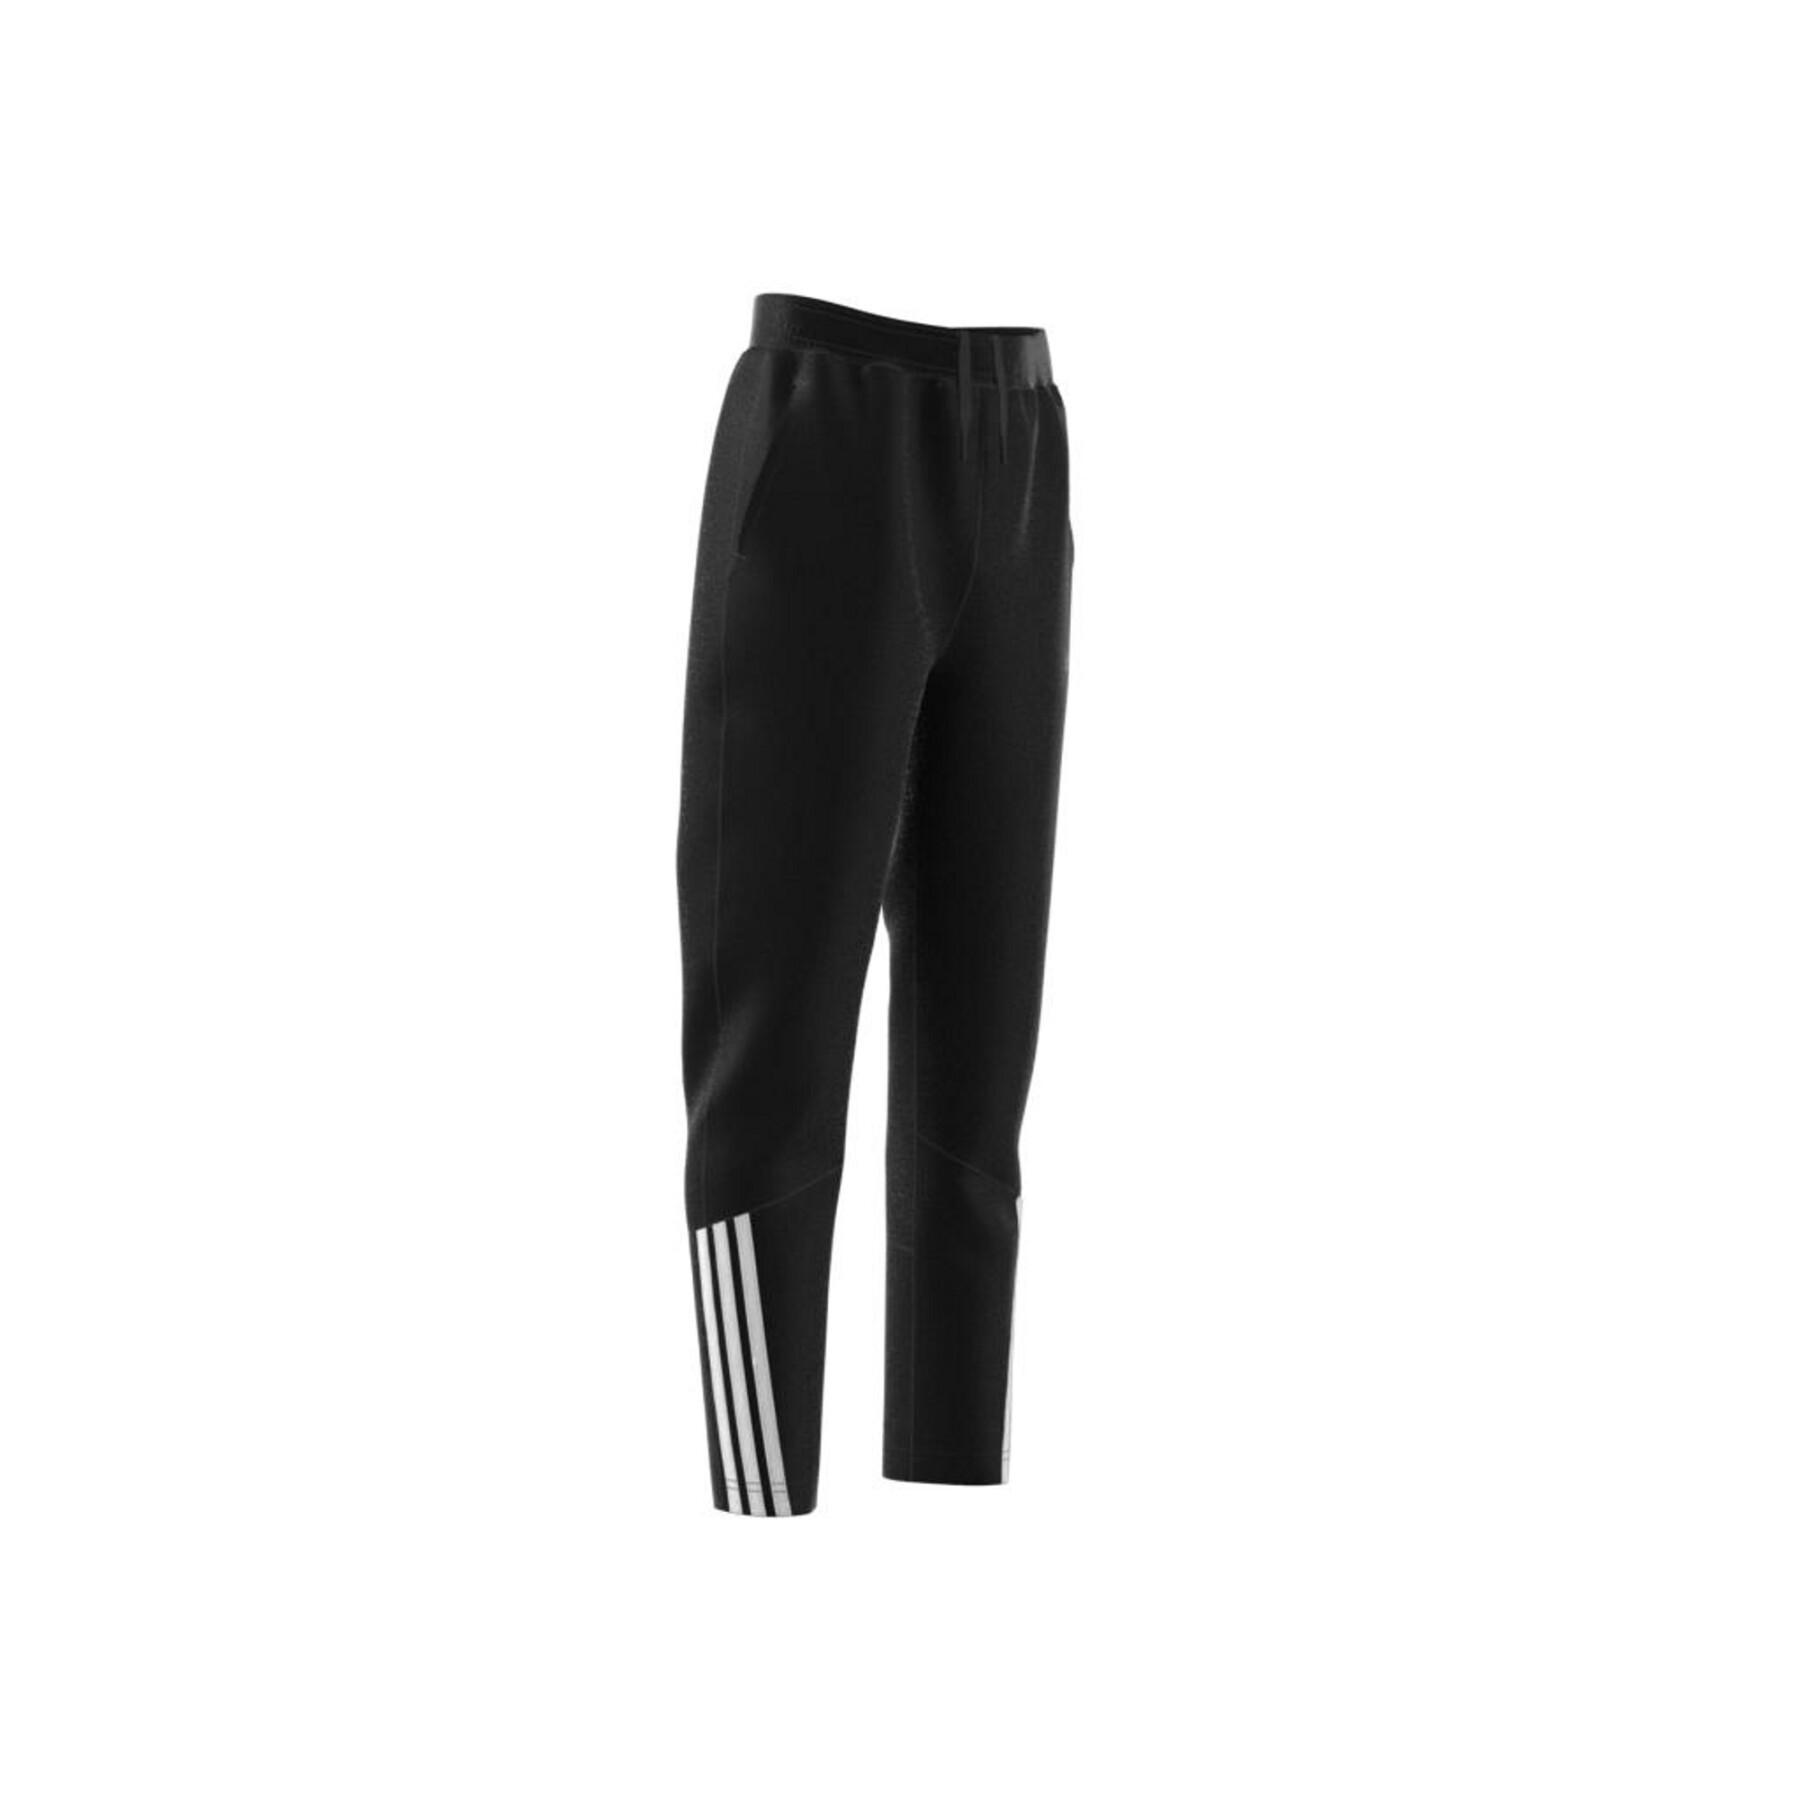 Children's trousers adidas ARKD3 Warm Woven 3-Stripes Tapered